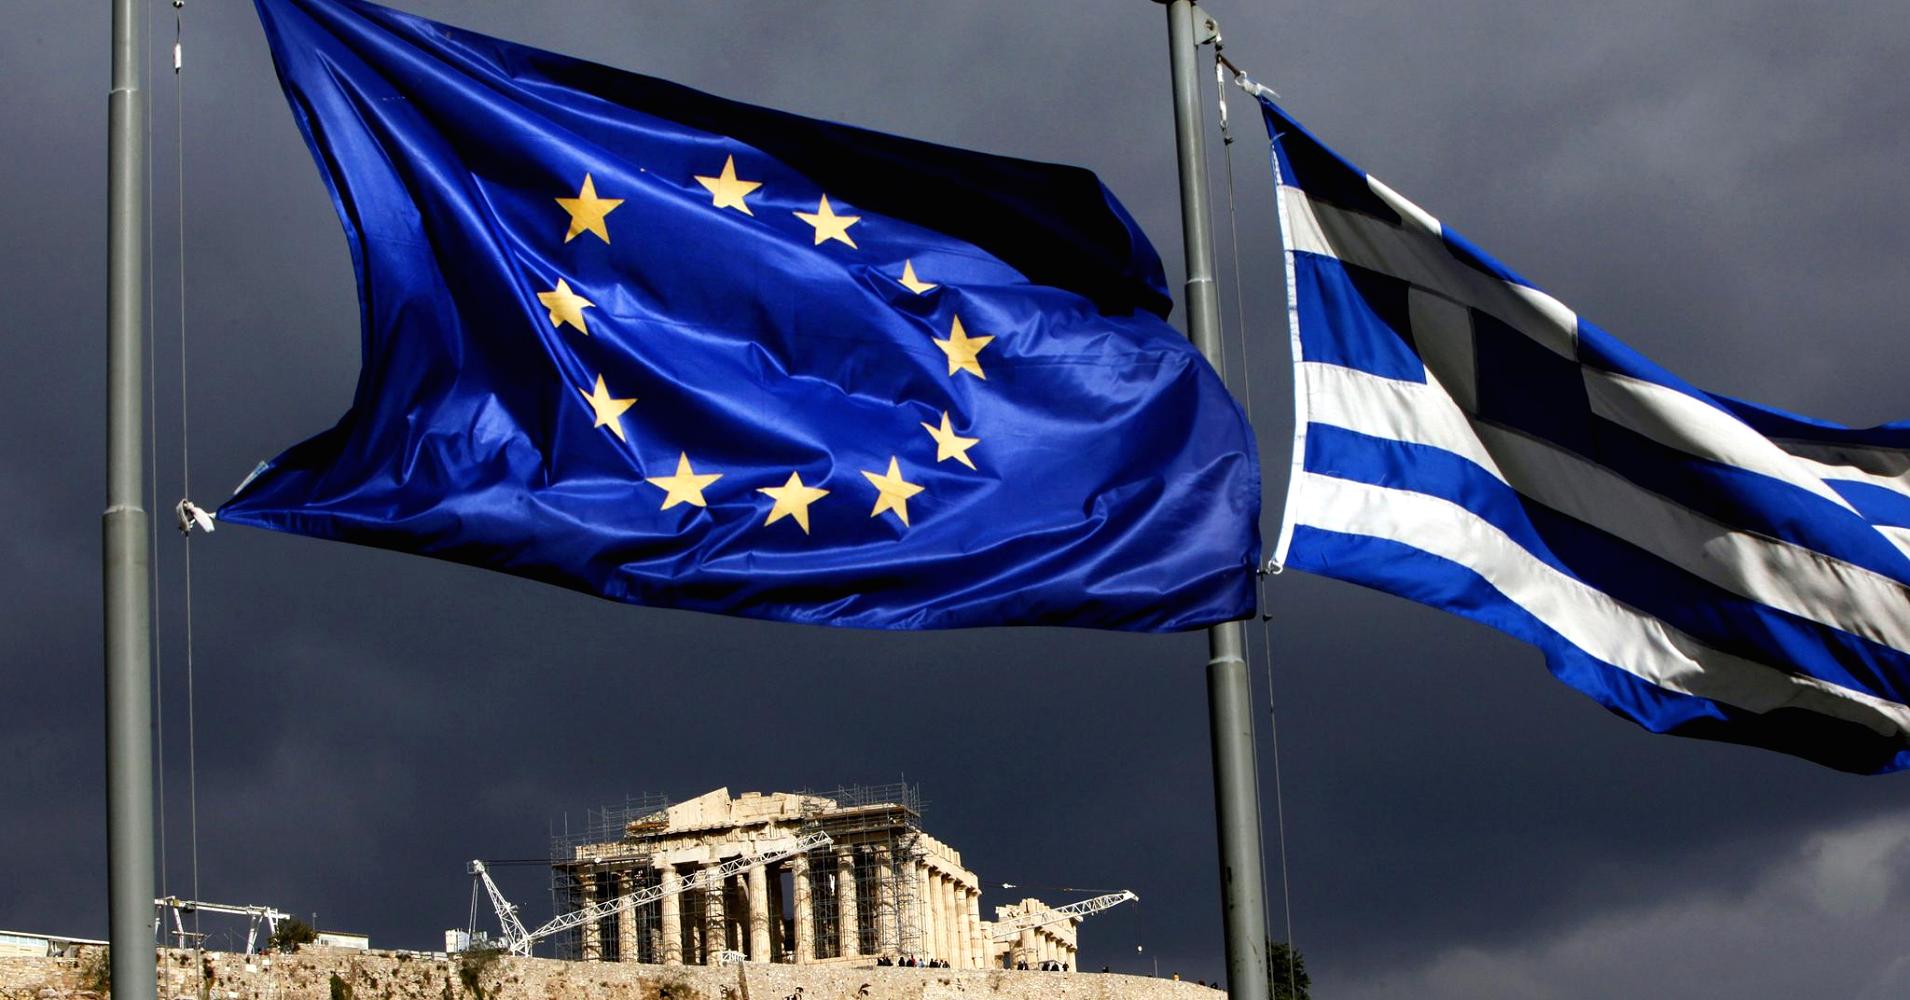 Angelos Tzortzinis | Bloomberg via Getty Images A European Union flag, left, and Greek national flag fly near the Parthenon temple on Acropolis hill in Athens, Greece.